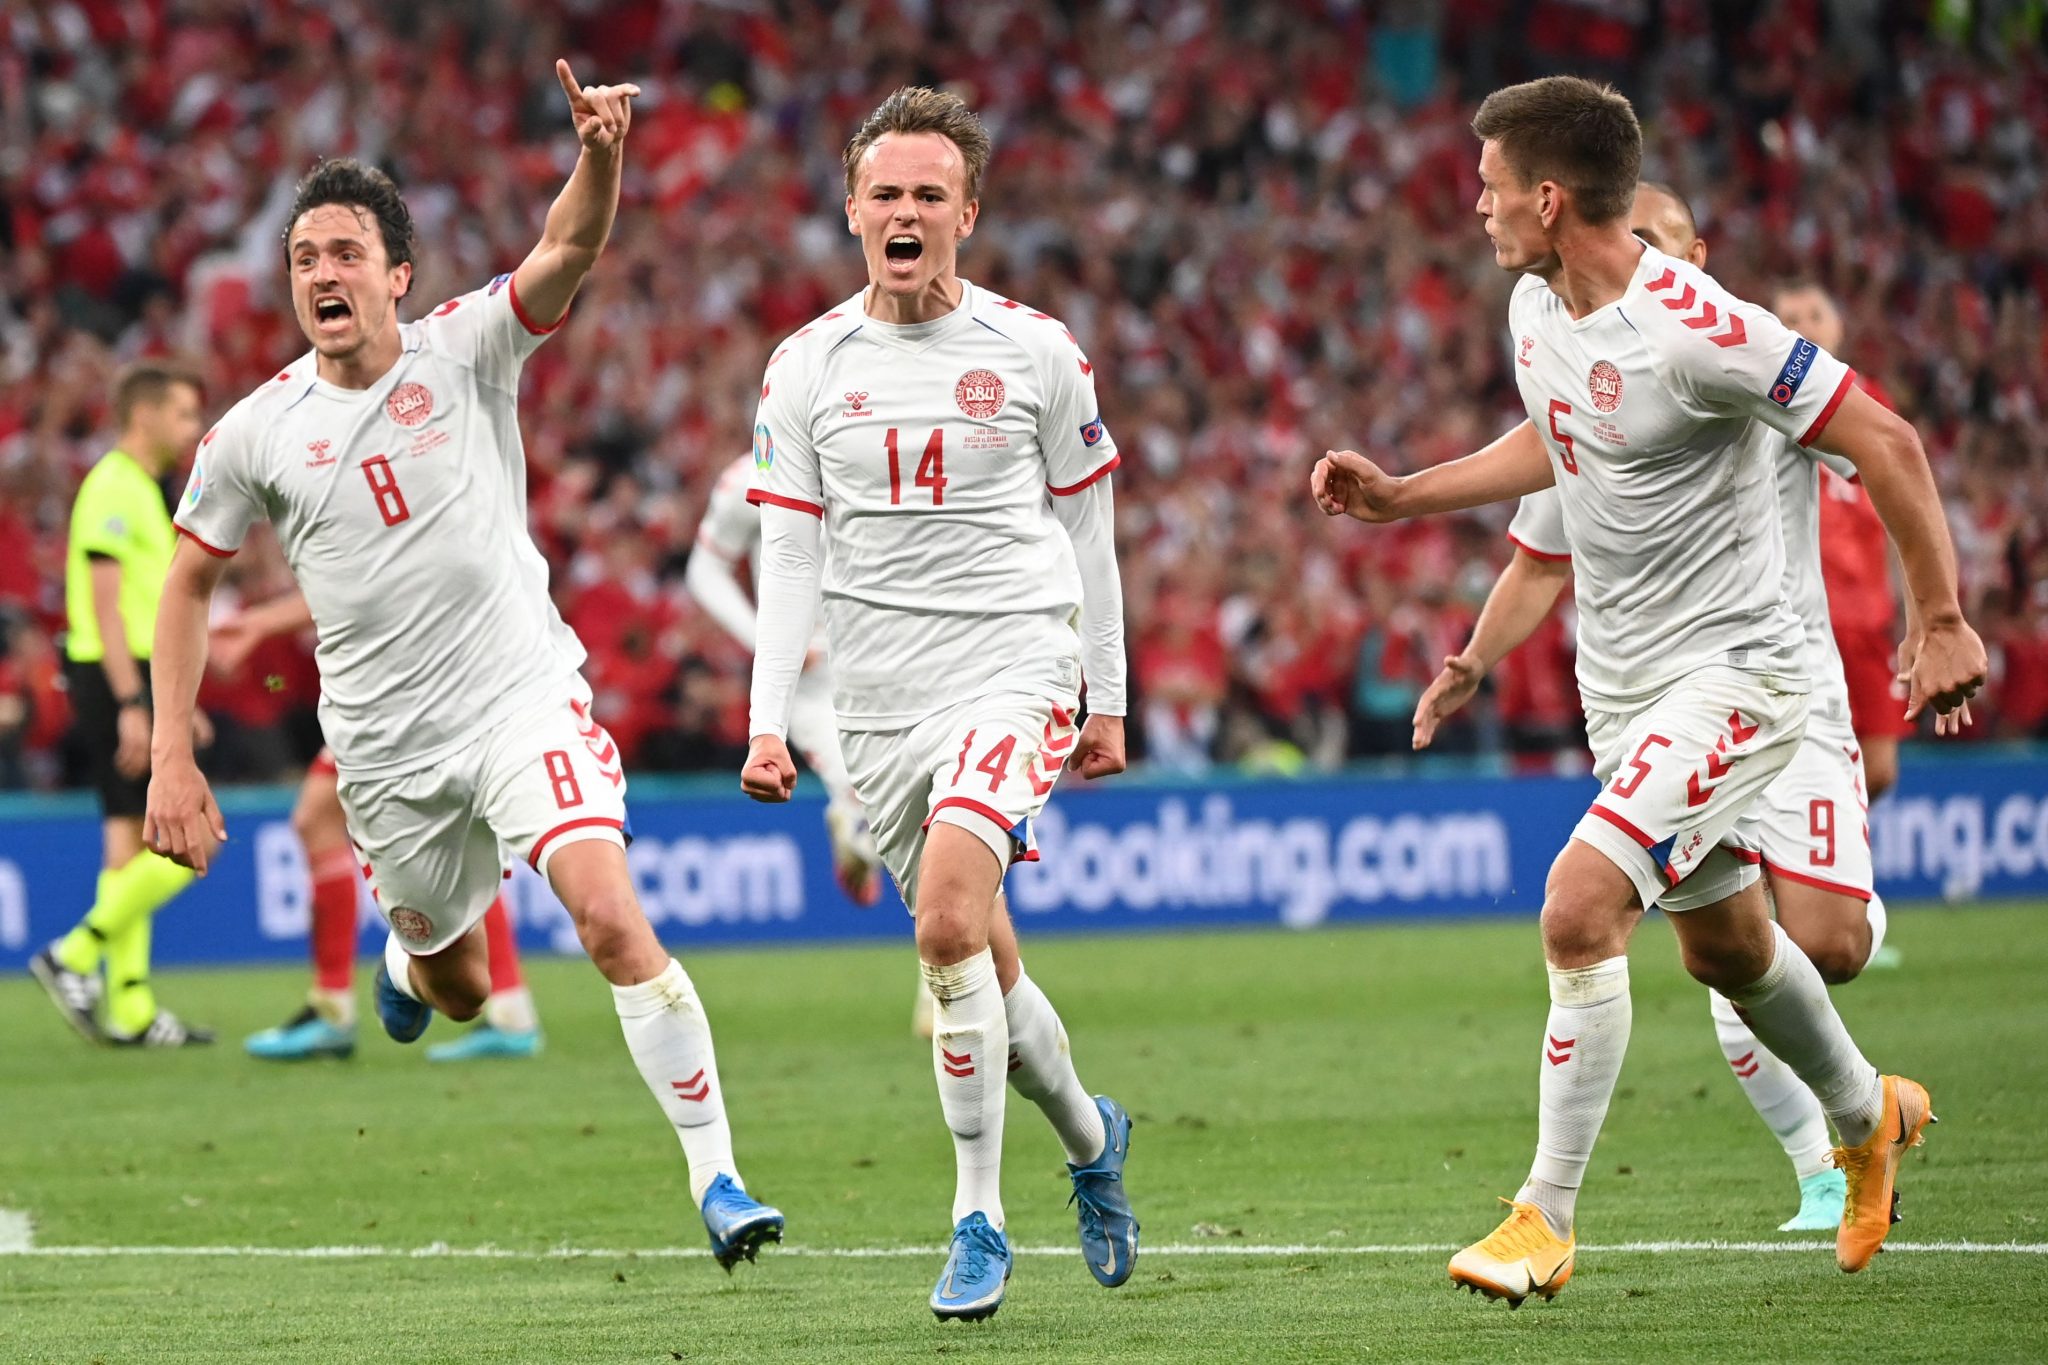 Denmark advance in Euro 2020 last 16 after emphatic win over Russia